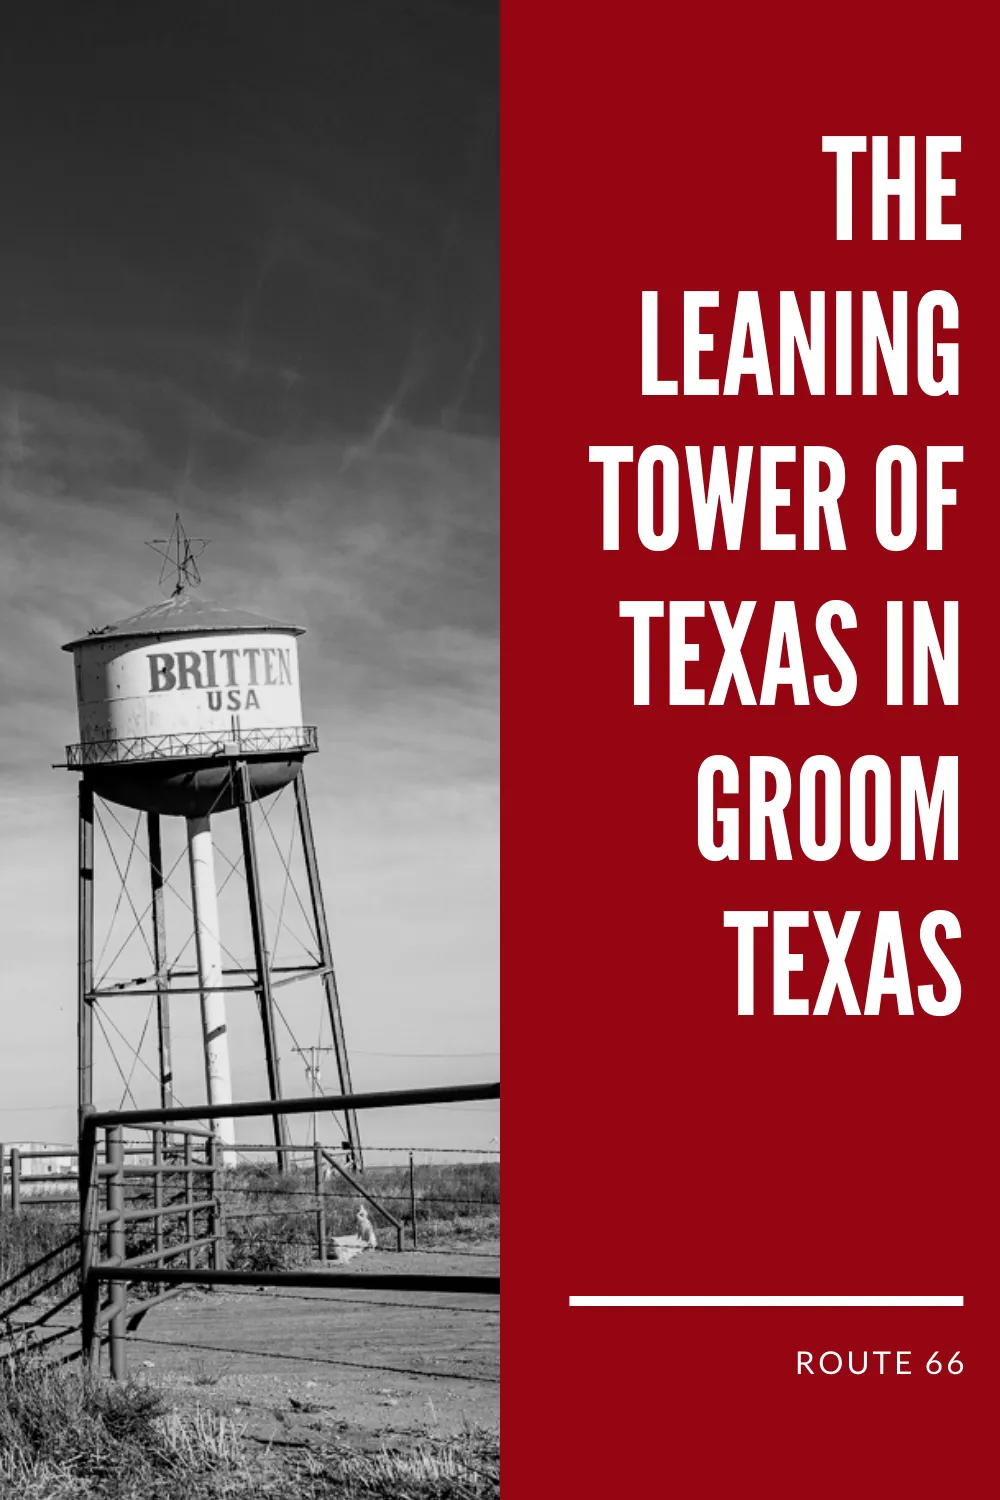 You’ve heard of the Leaning Tower of Pisa...but have you heard of the Leaning Tower of Texas in Groom, Texas? The Leaning Tower of Texas, also known as the Leaning Tower of Britten, is just that: a leaning tower (water tower that is) located, appropriately in Texas. Located along the former Route 66, now US Interstate 40, you can’t miss seeing this odd site from the road.  #Route66 #Route66RoadTrip #Texas #TexasRoadTrip #RoadTrip #RoadsideAttraction #RoadsideAttractions #TexasRoadsideAttraction